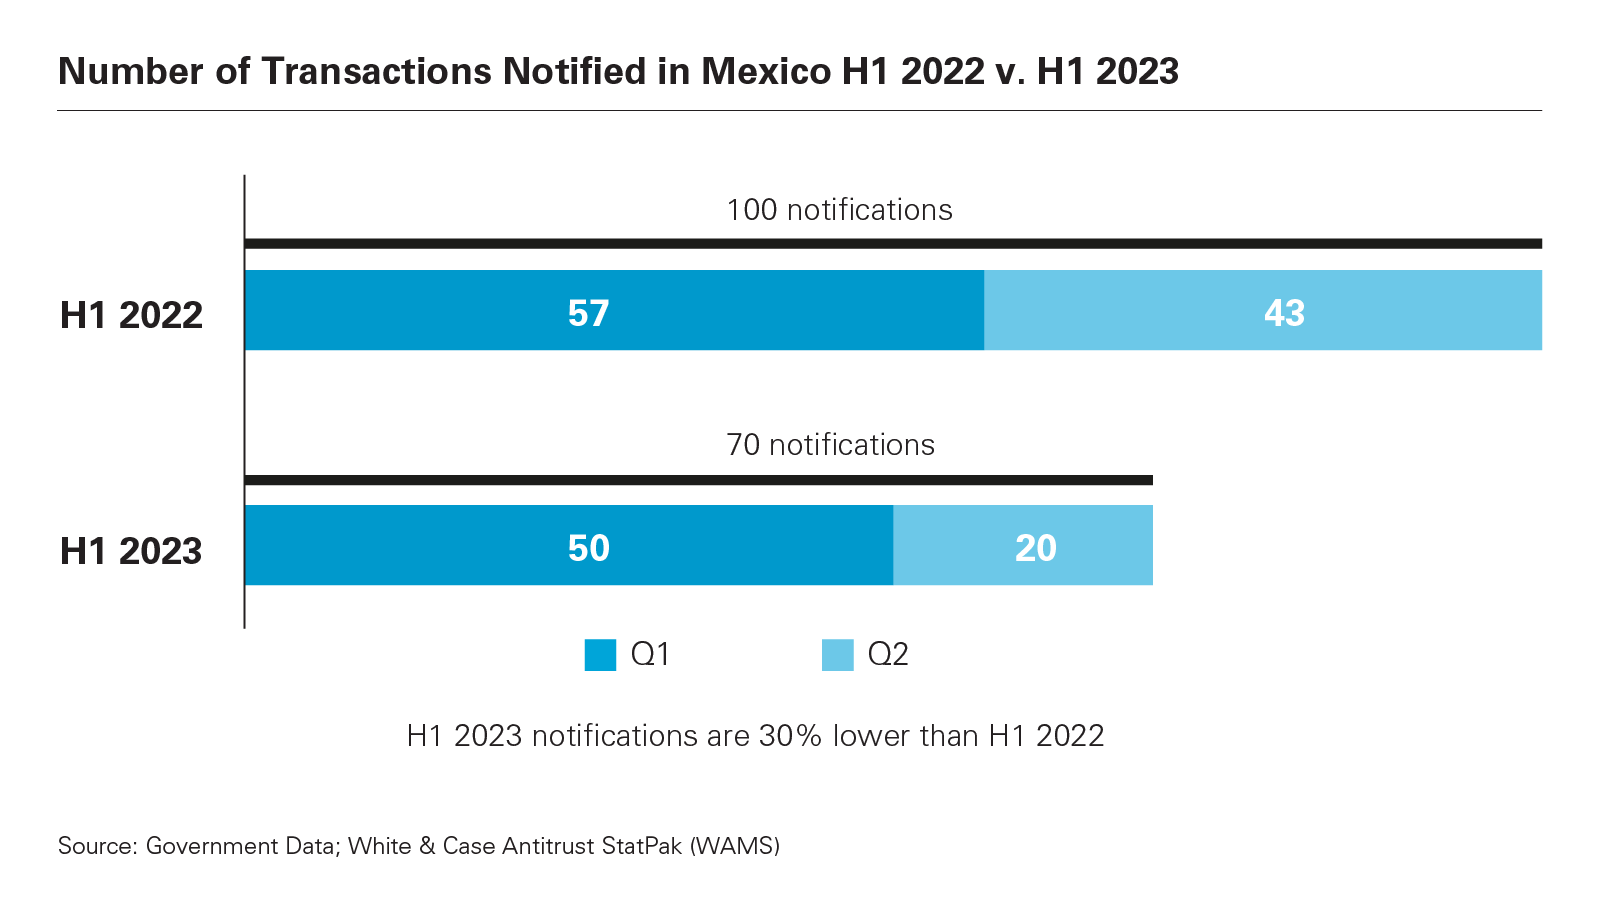 Number of Transactions Notified in Mexico H1 2022 v. H1 2023 graph